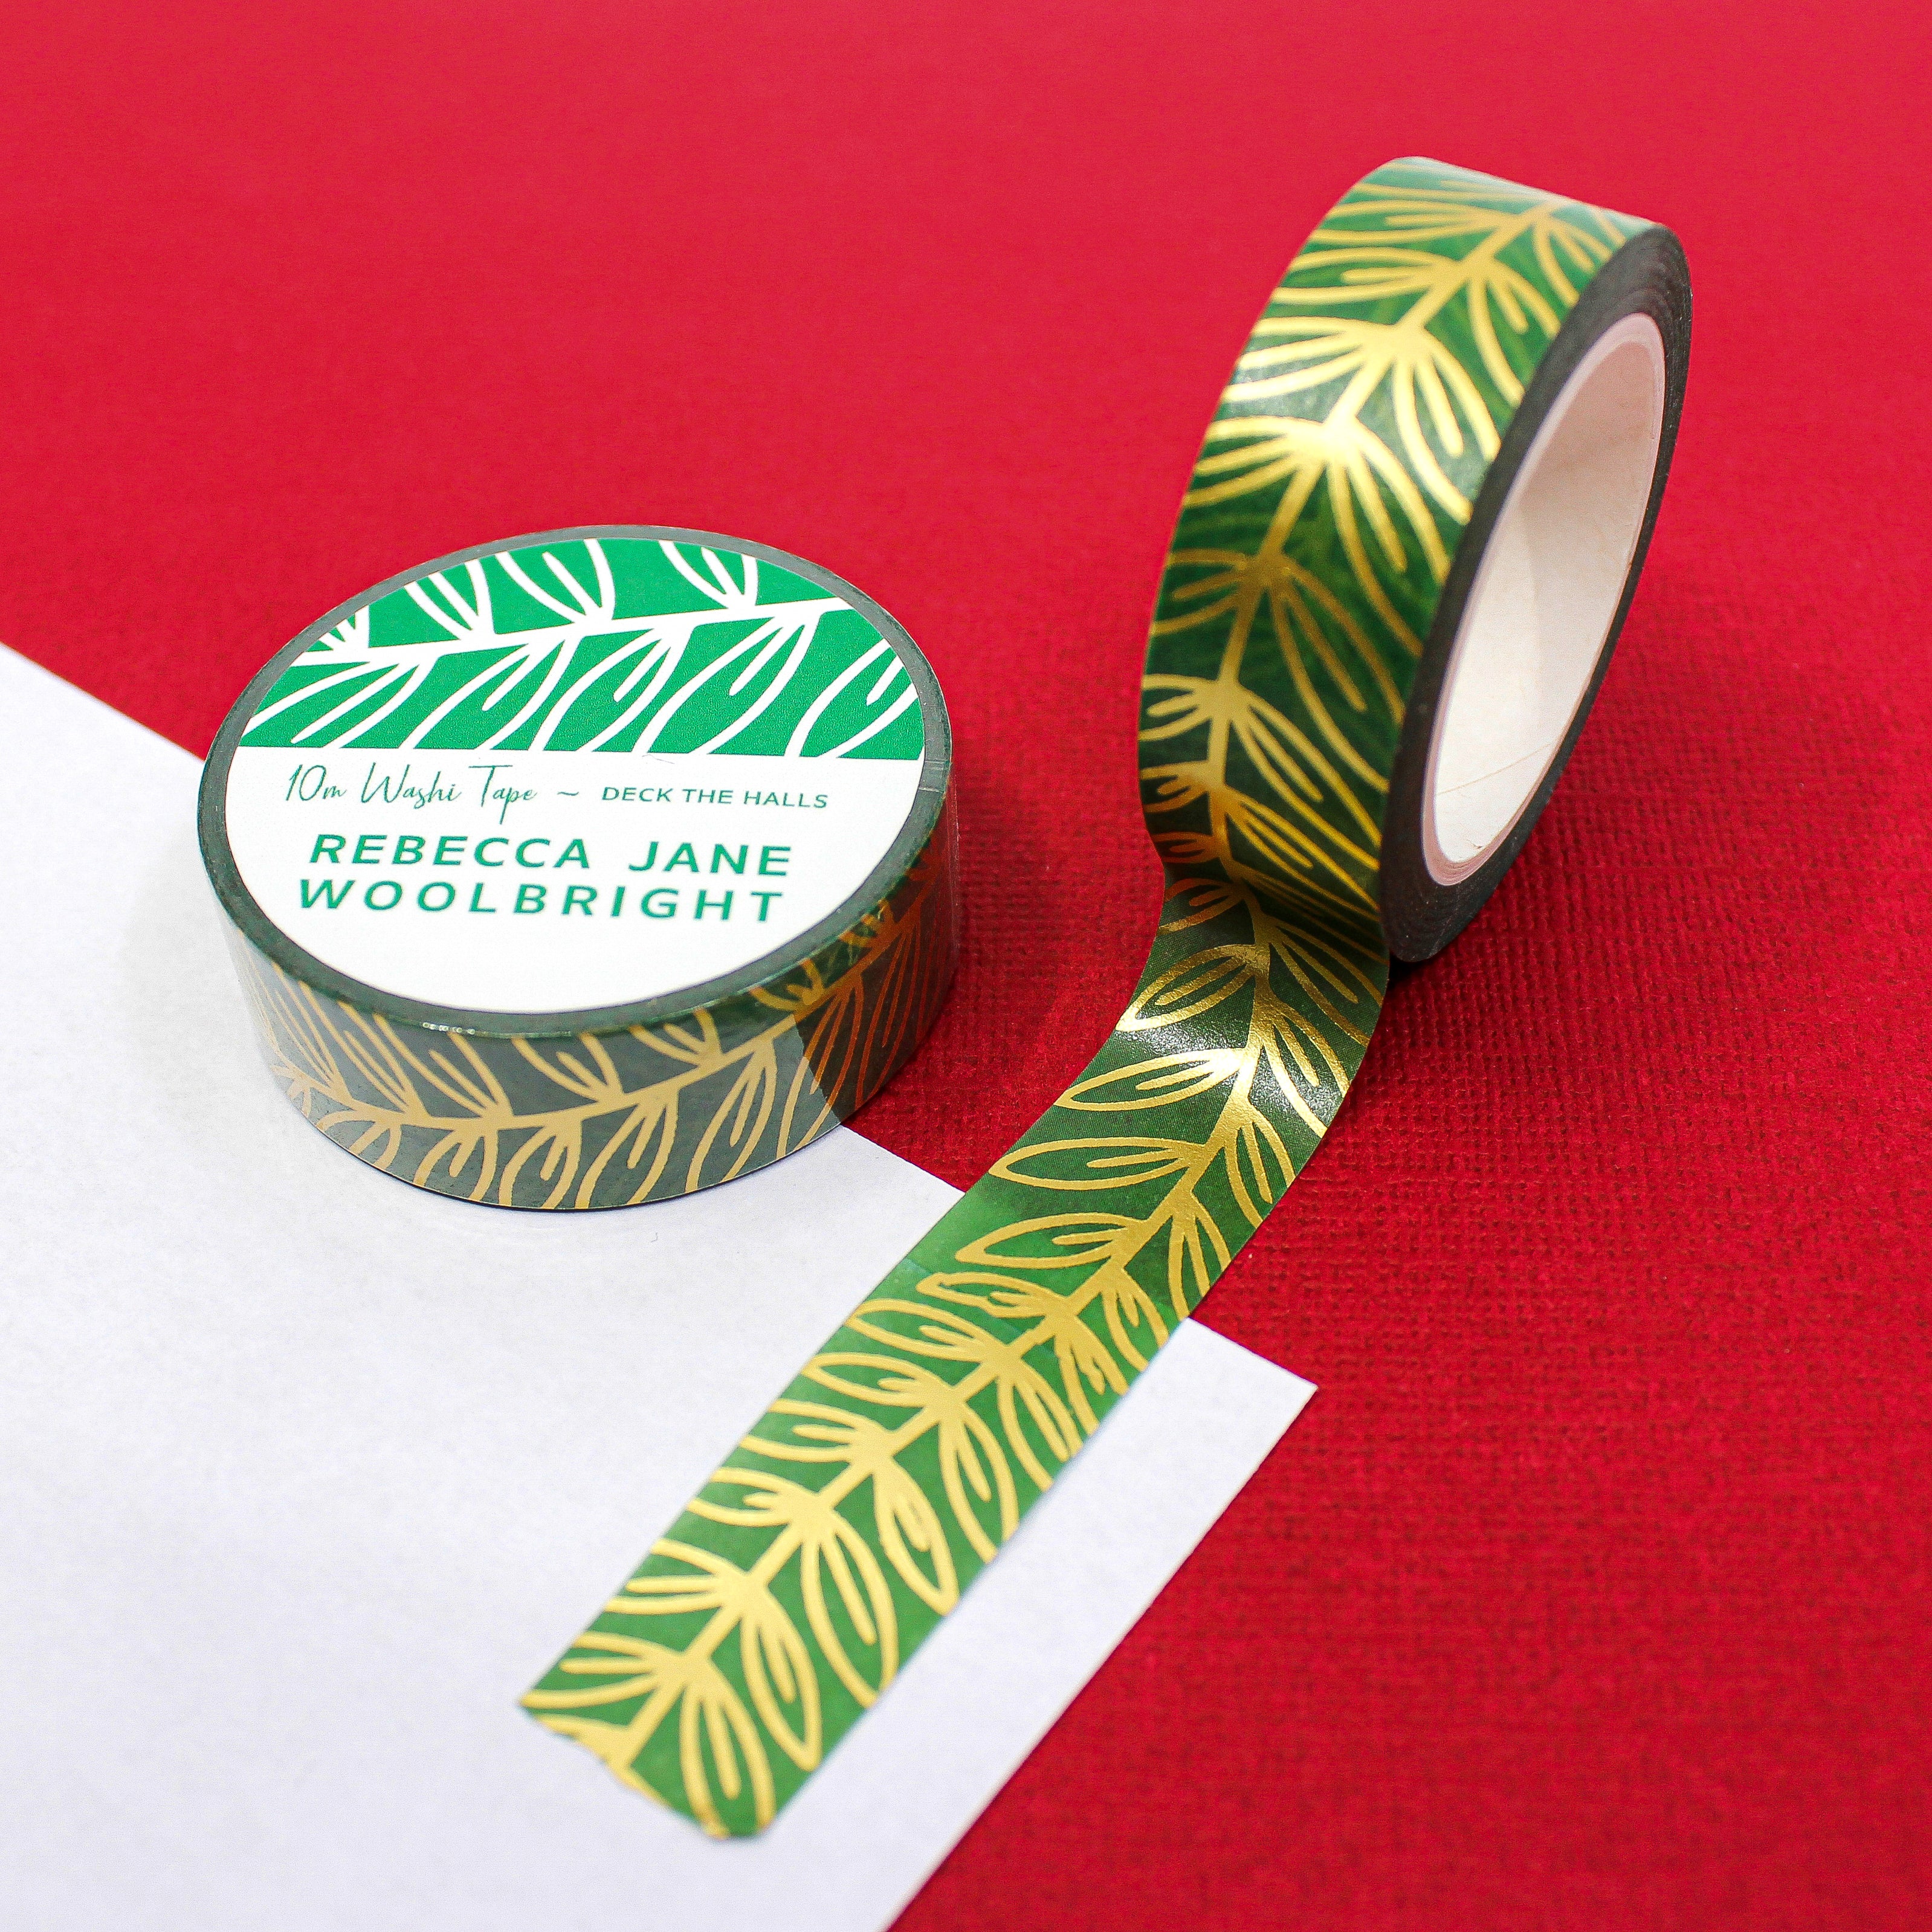 This is a green vines view themed washi tape from BBB Supplies Craft Shop